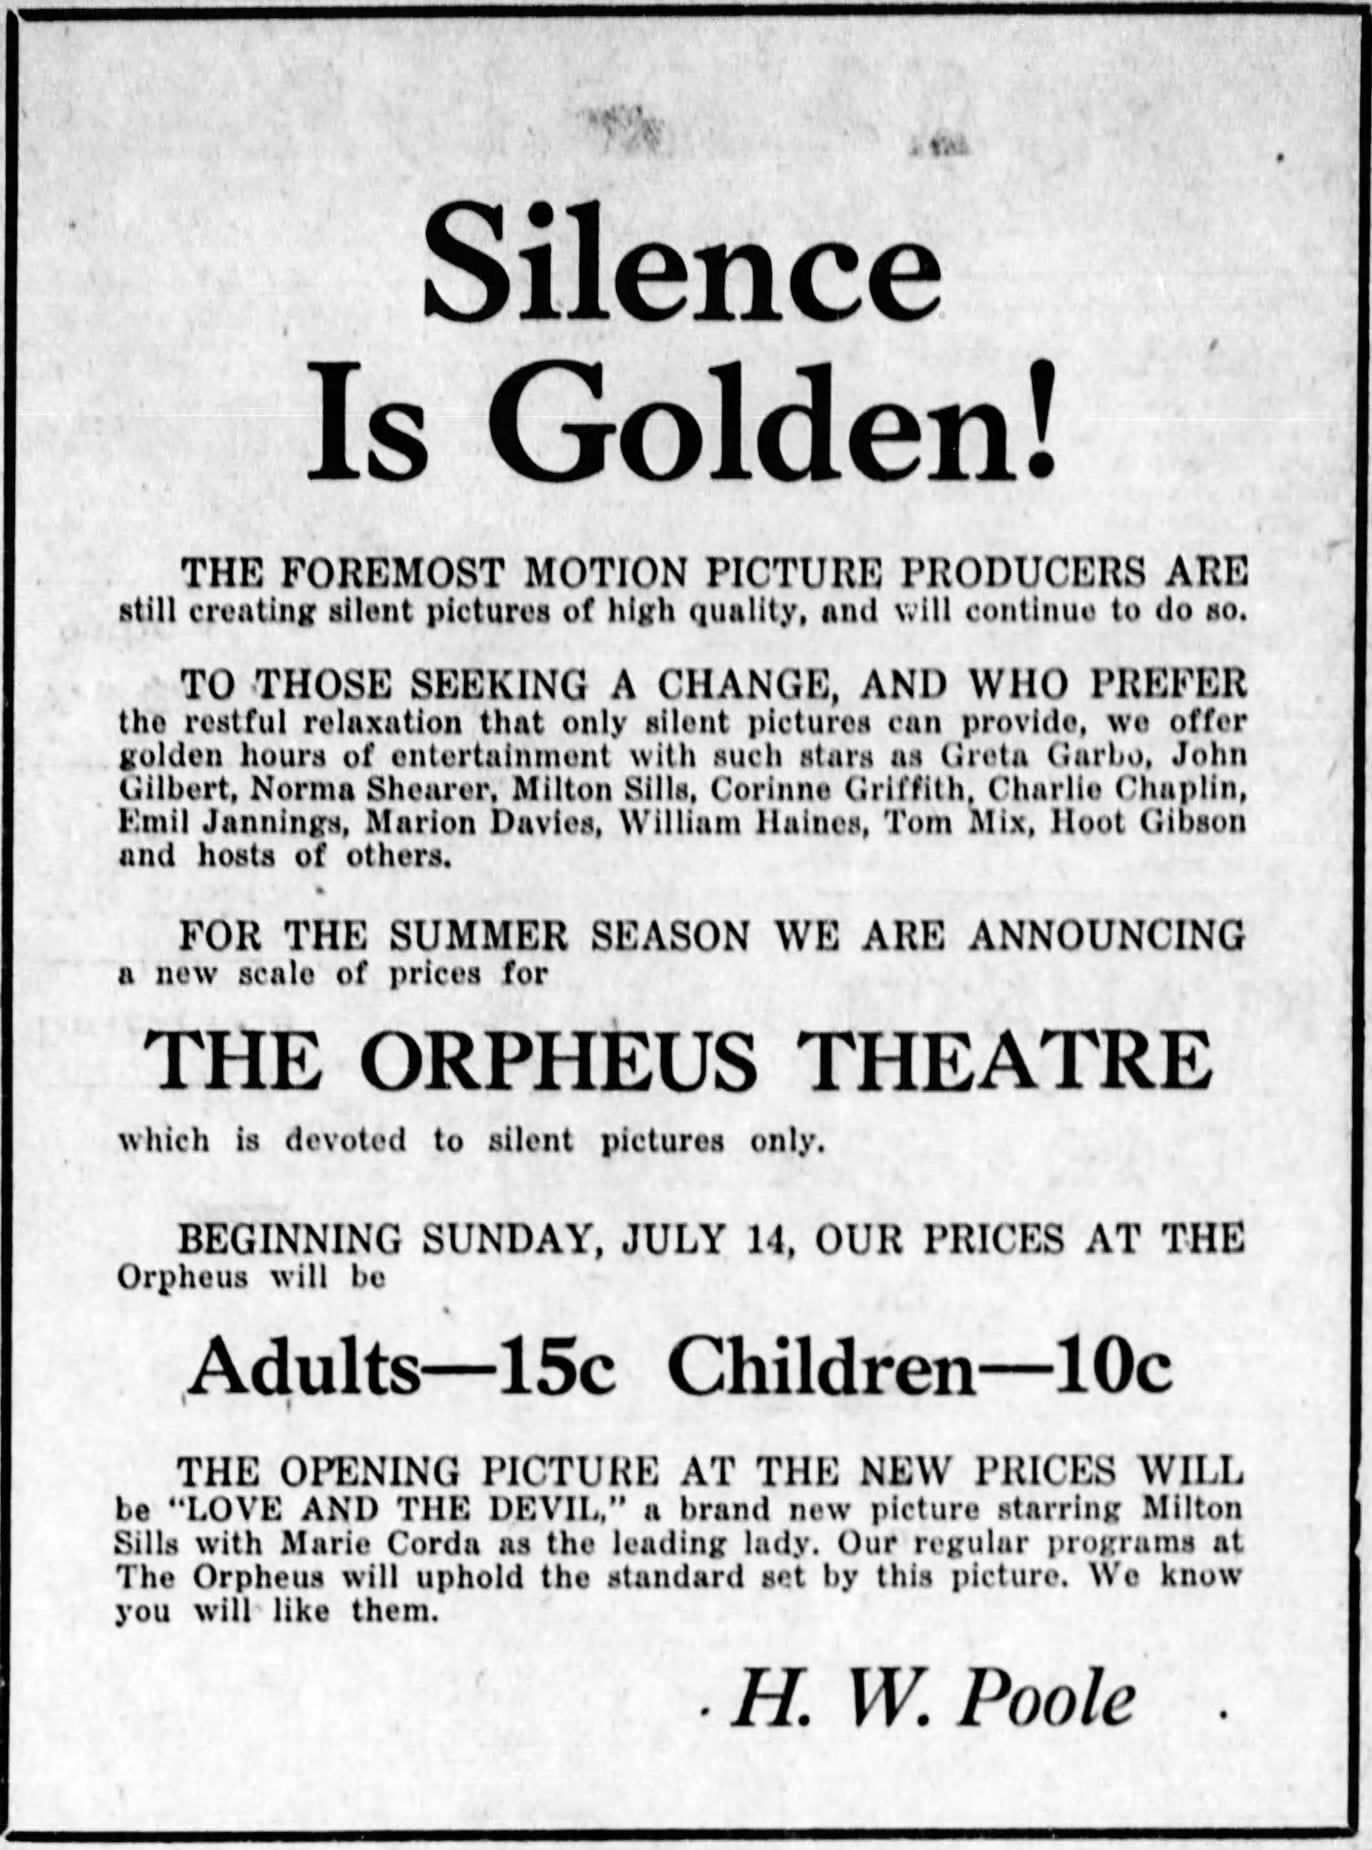 Silent films at the Orpheus, 1929